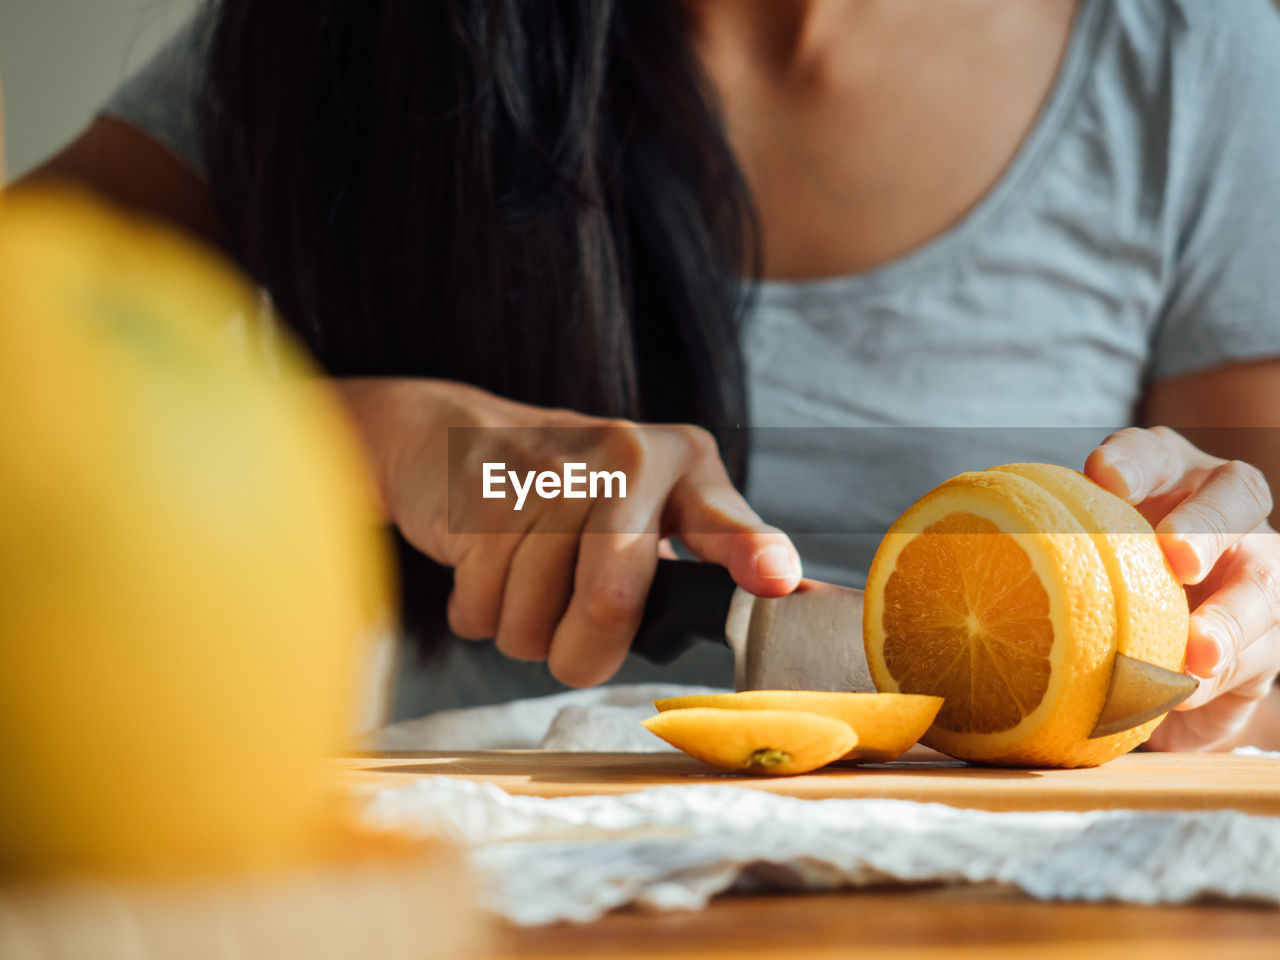 Midsection of woman cutting orange on board